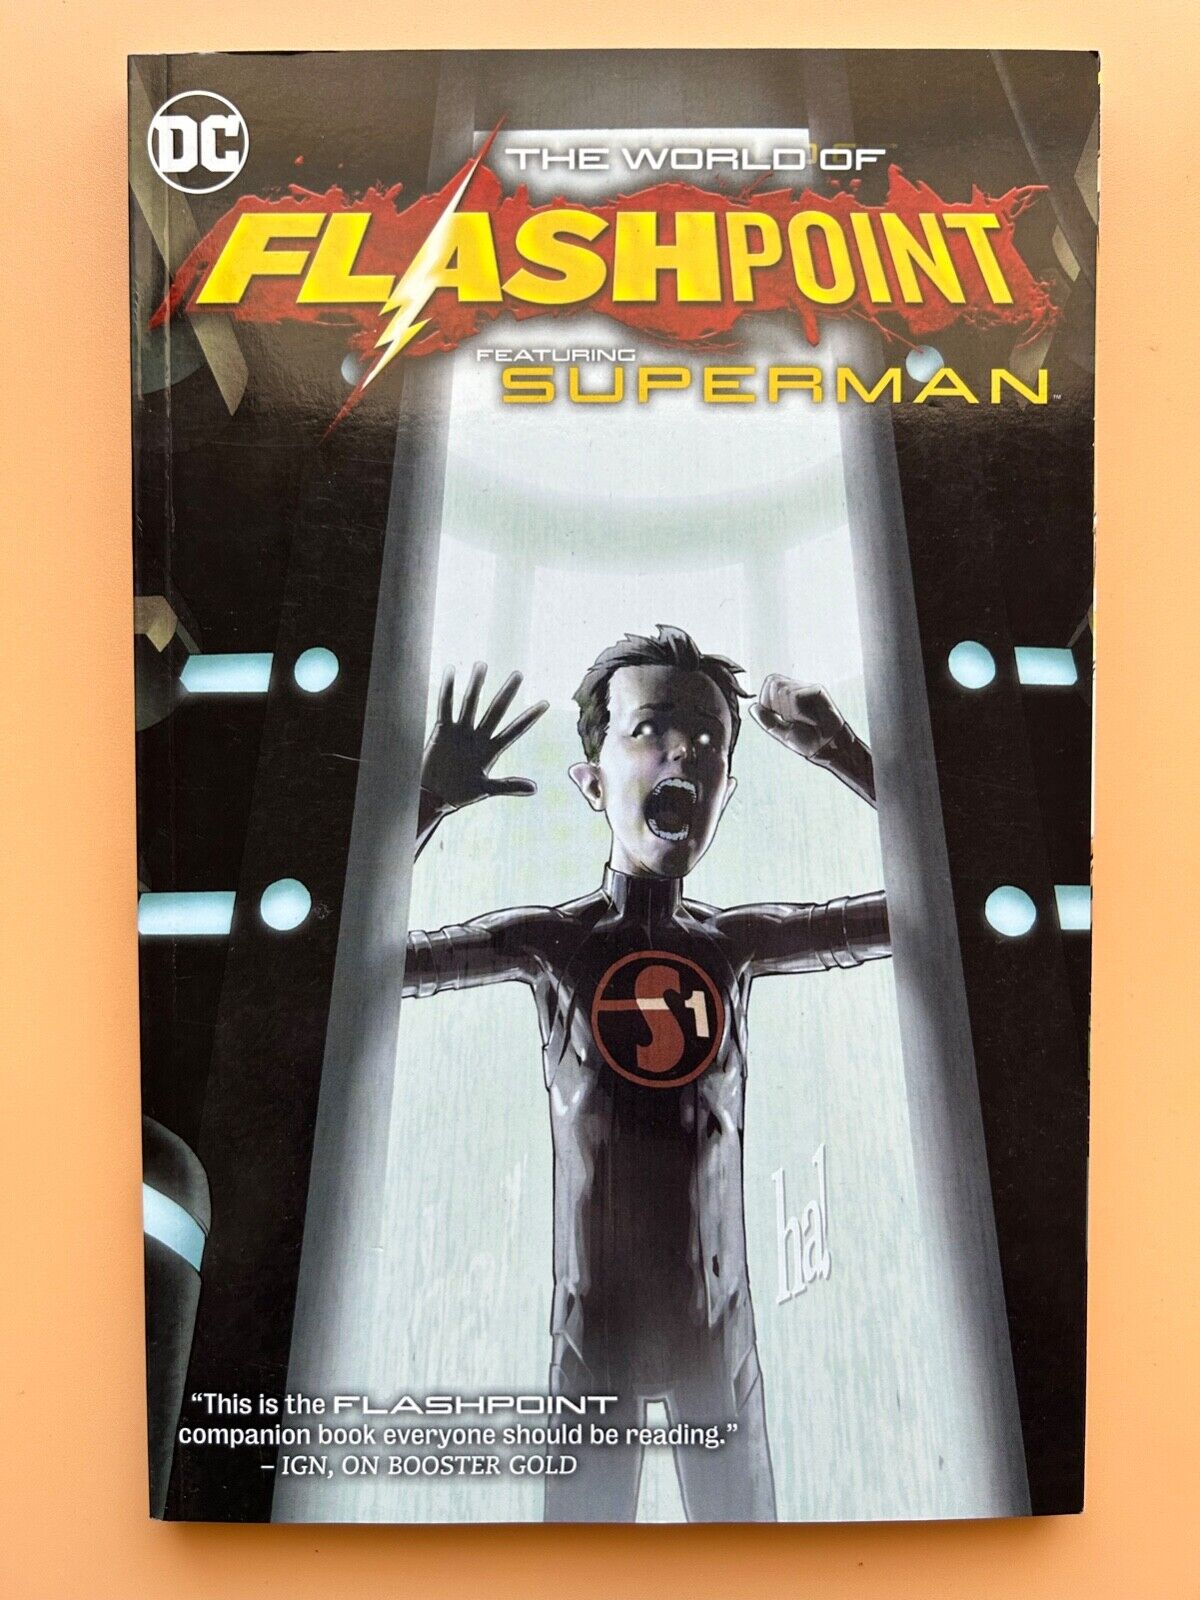 Flashpoint: the World of Flashpoint Featuring Superman (DC Comics May 2012) 